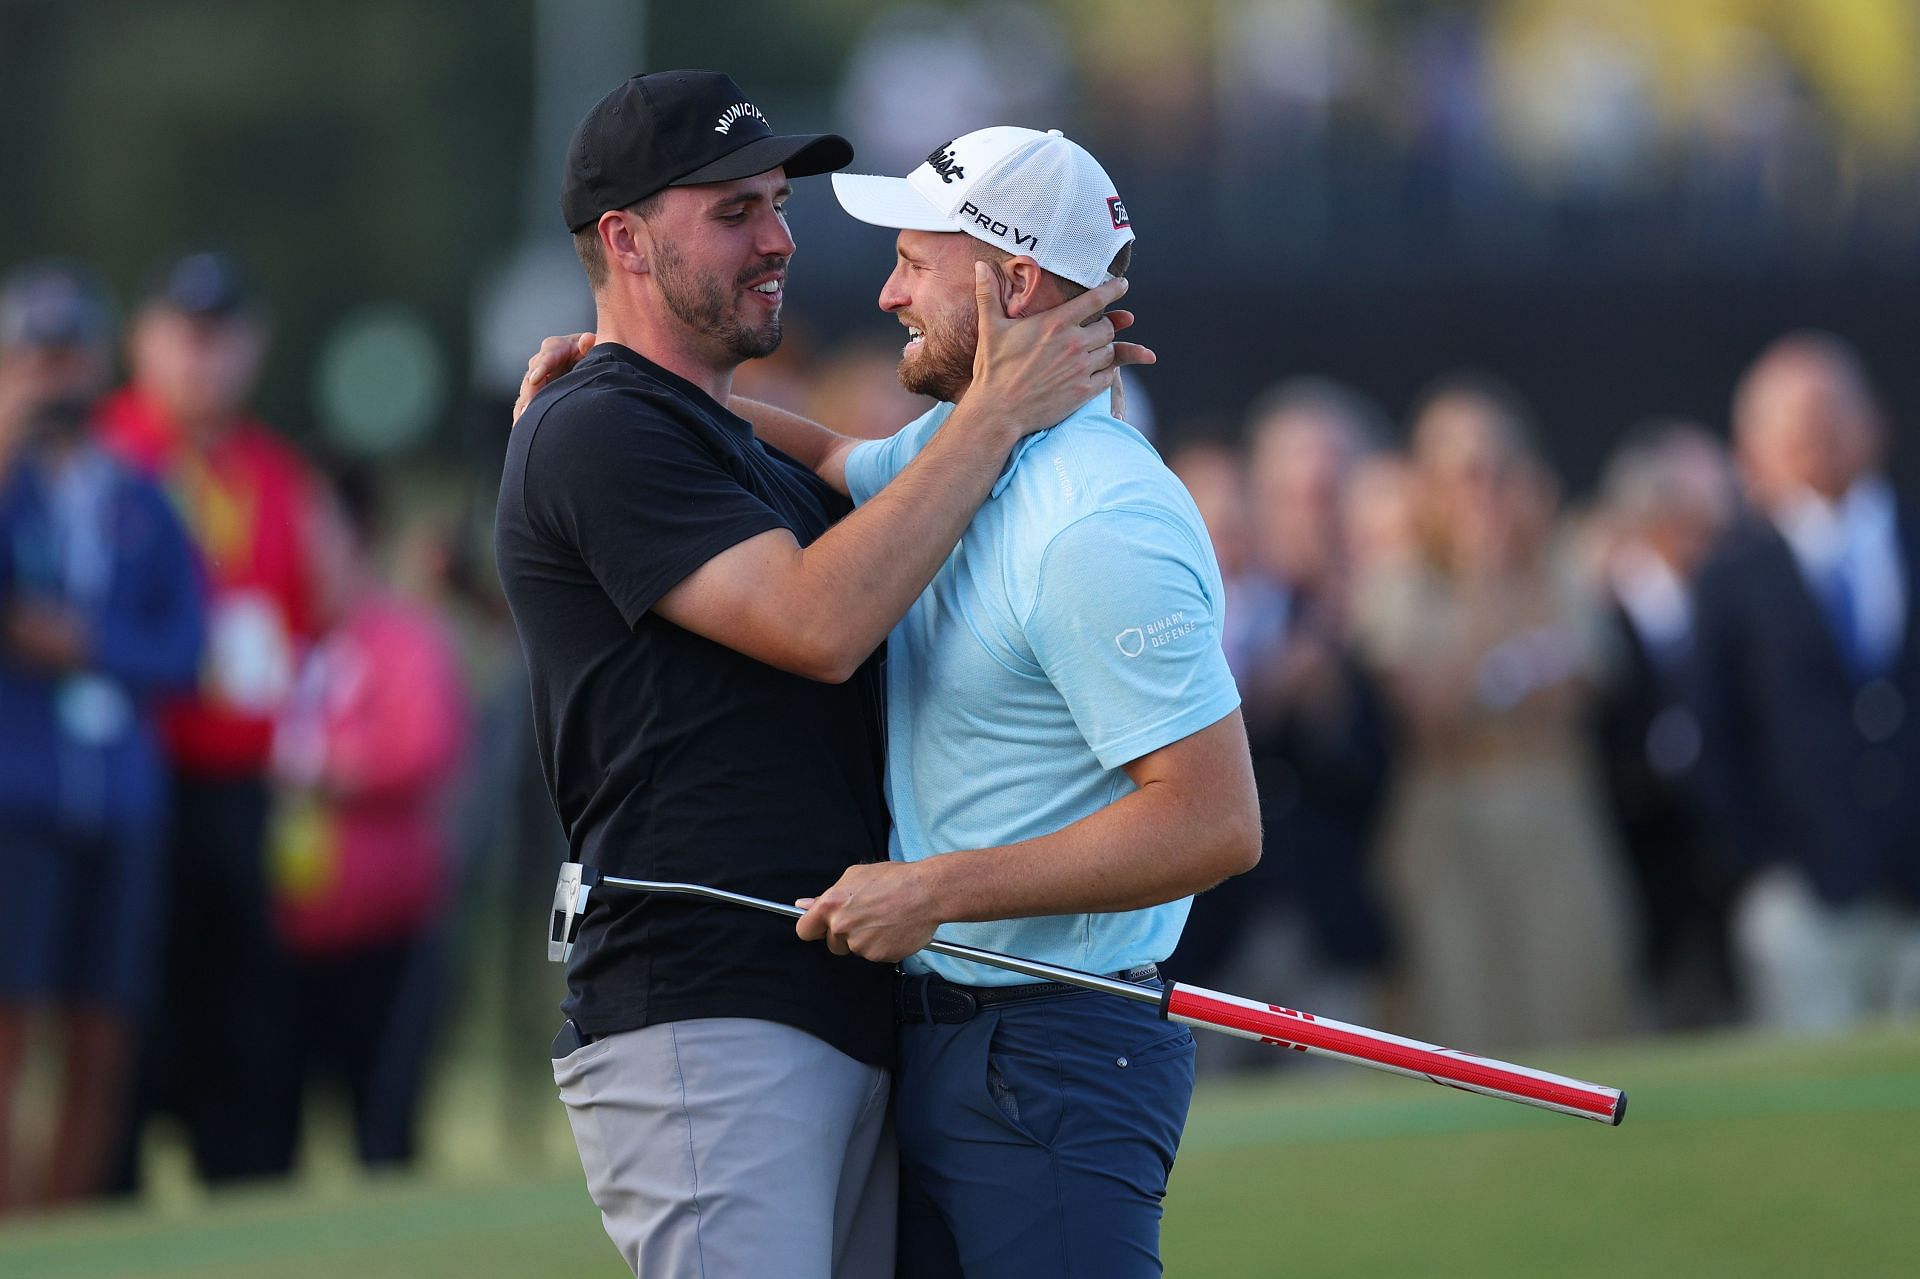 Wyndham Clark celebrated with his brother after making the winning putt at the 123rd US Open Championship